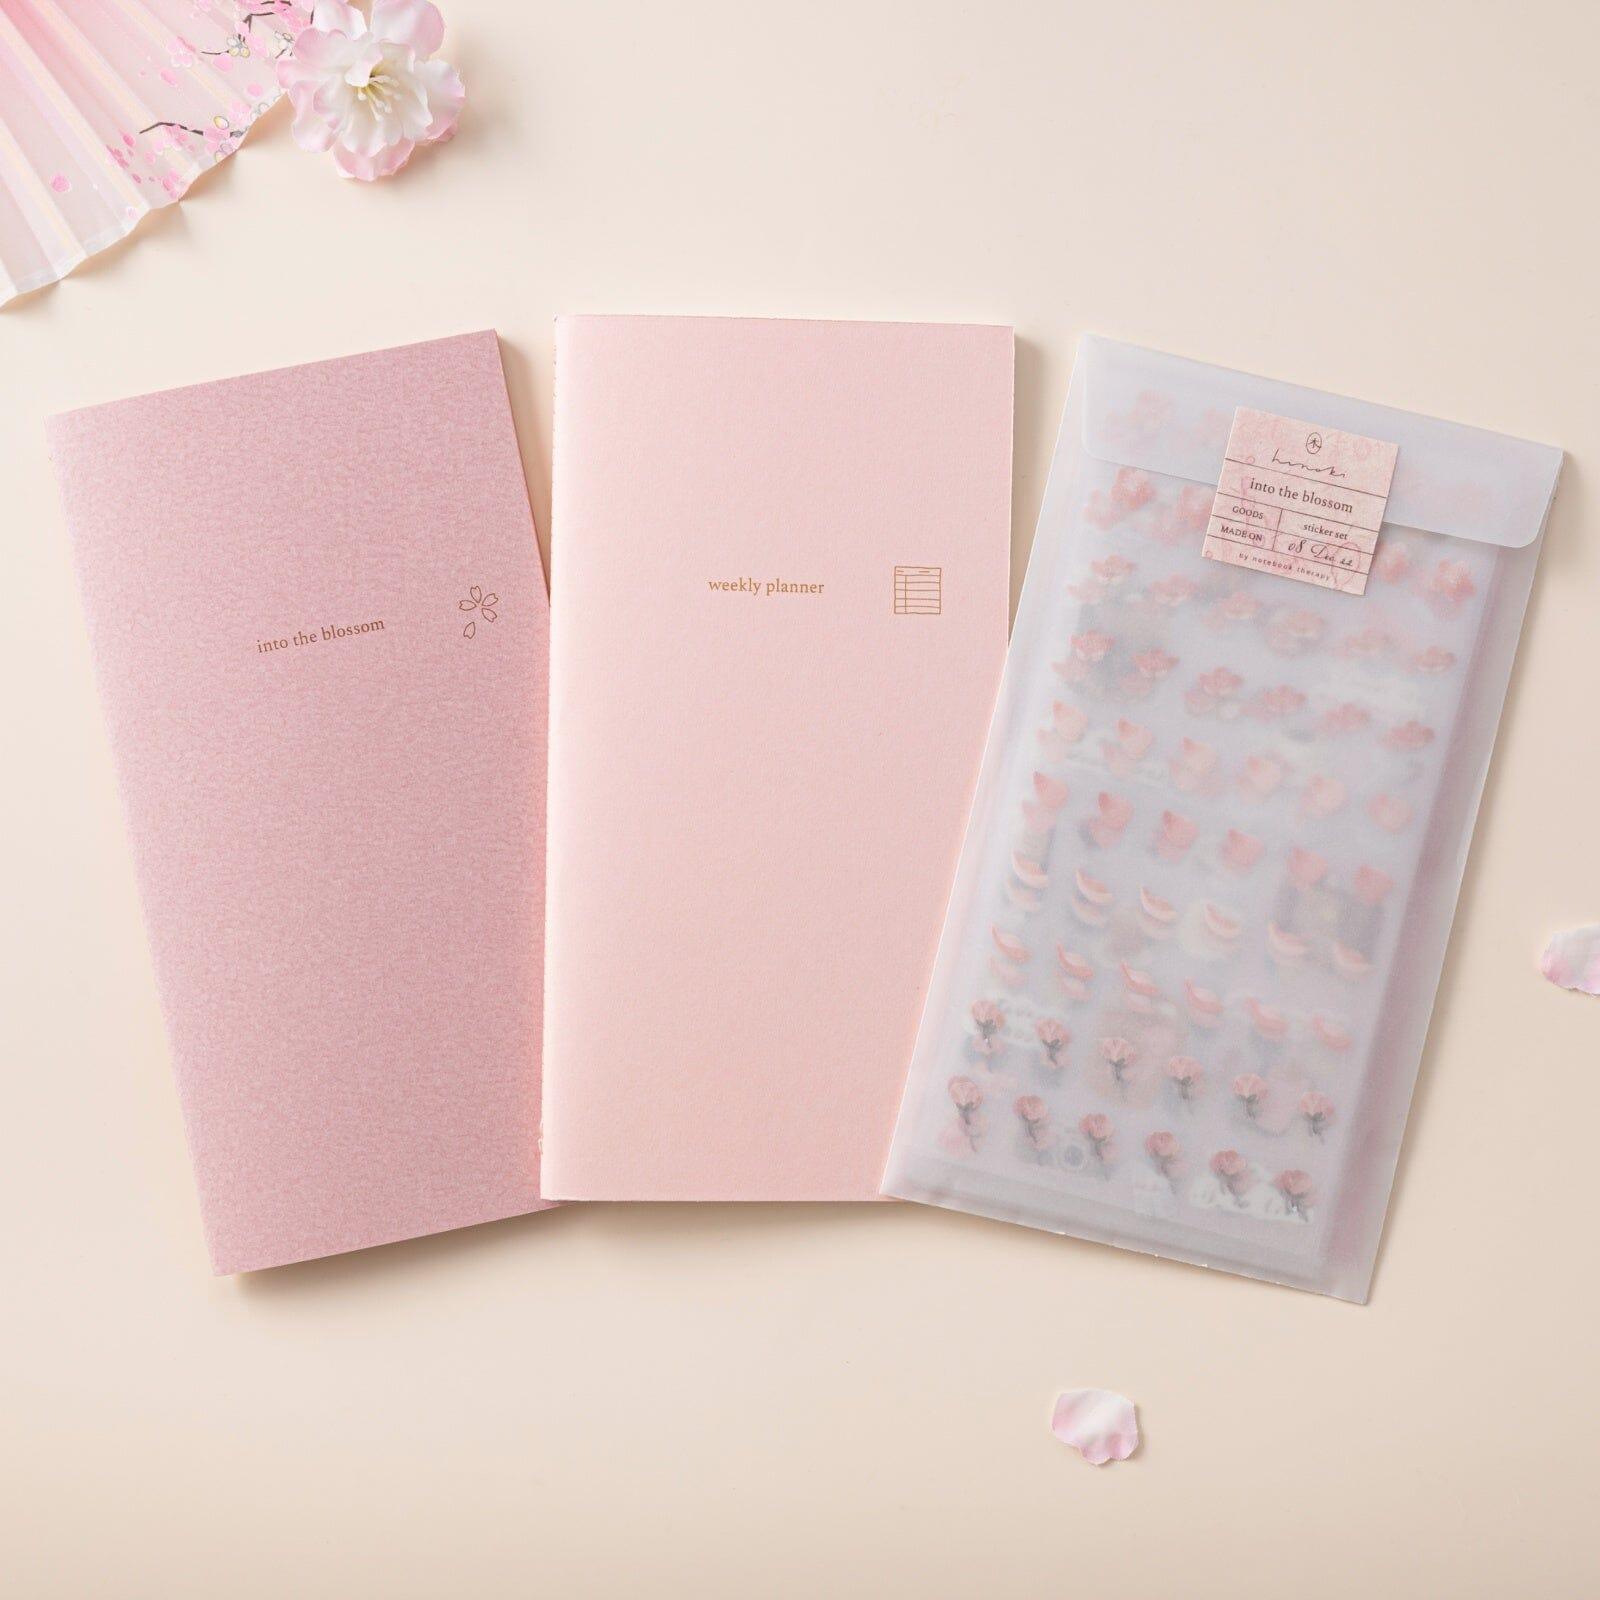 Hinoki - ‘Into the Blossom’ Mixed Insert + Sticker Set - Kevous